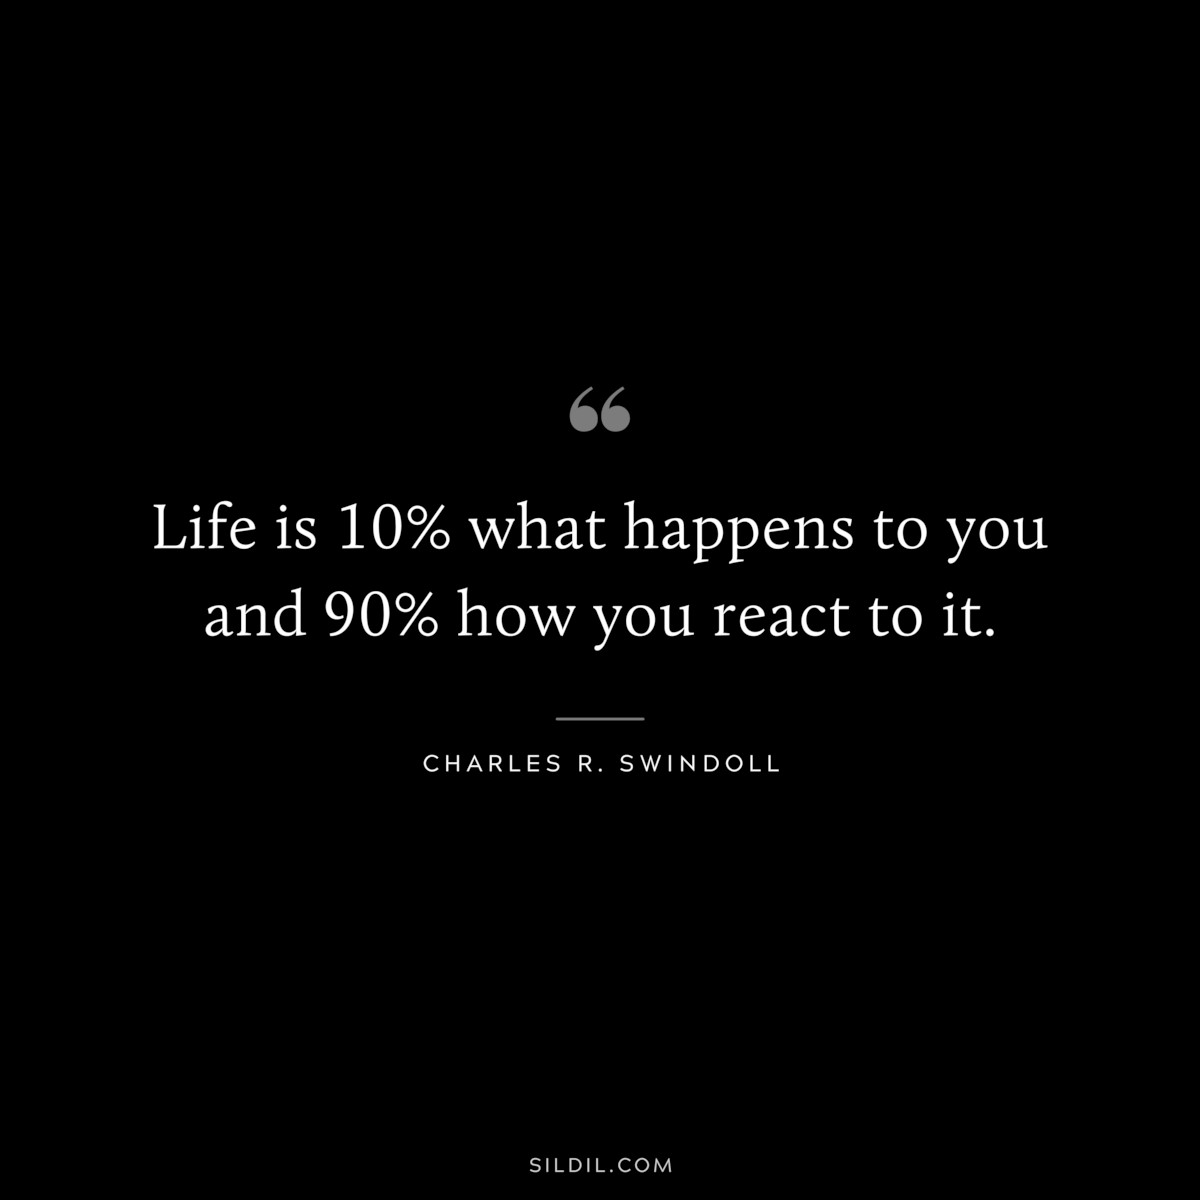 Life is 10% what happens to you and 90% how you react to it. ― Charles R. Swindoll